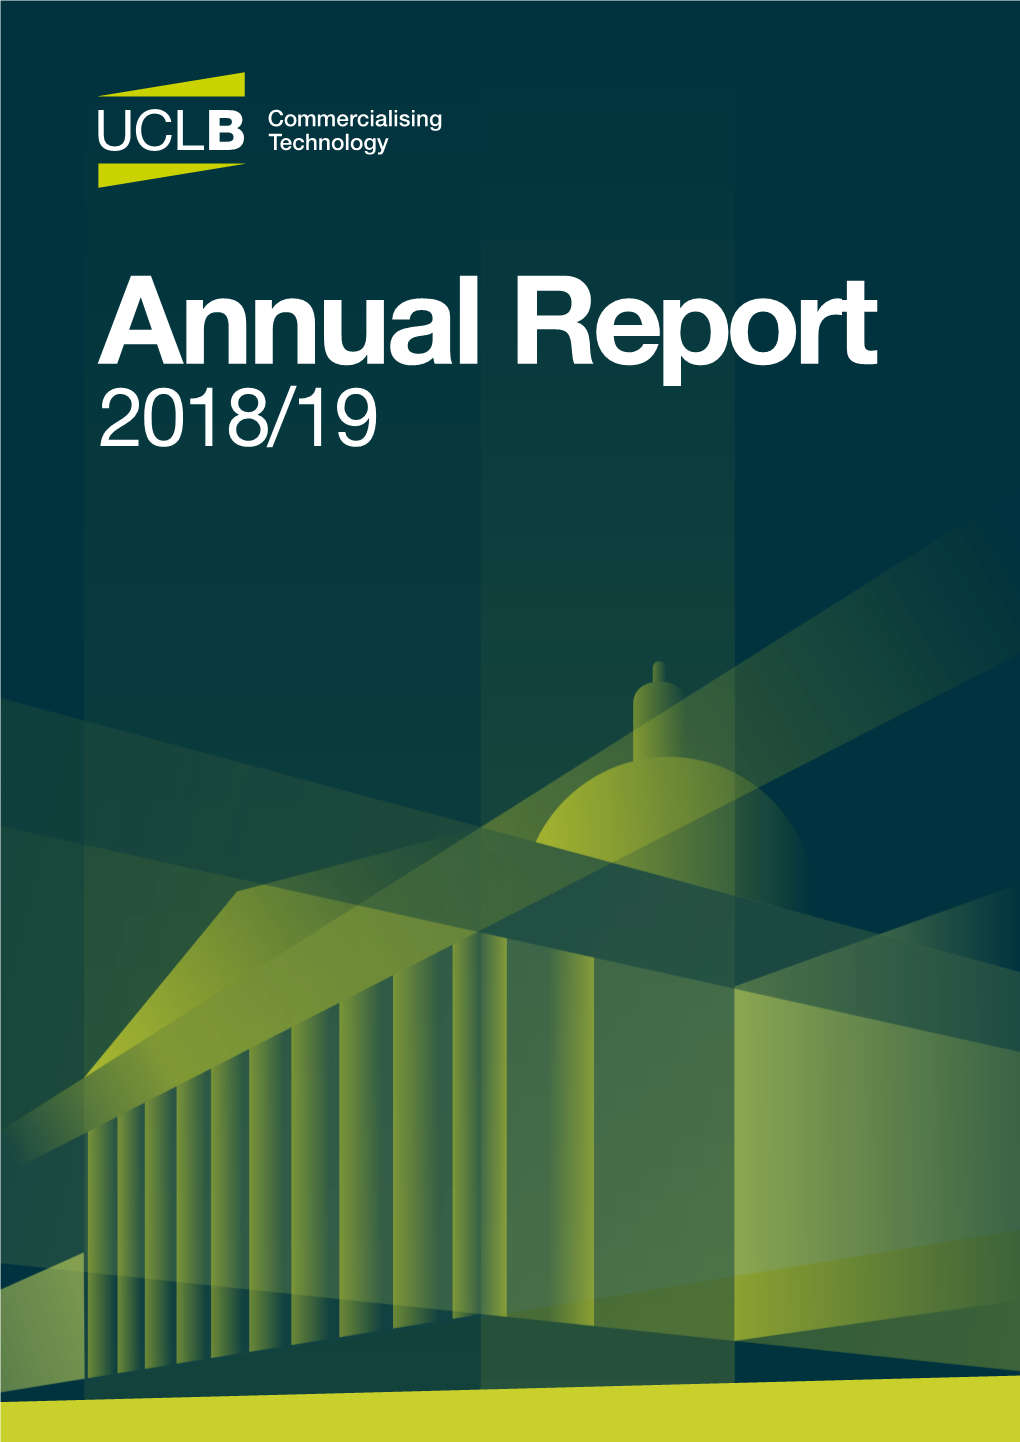 Annual Report 2018/19 Commercialising Technologies from UCL and Its Partner NHS Trusts Since 1993 £32Million Income